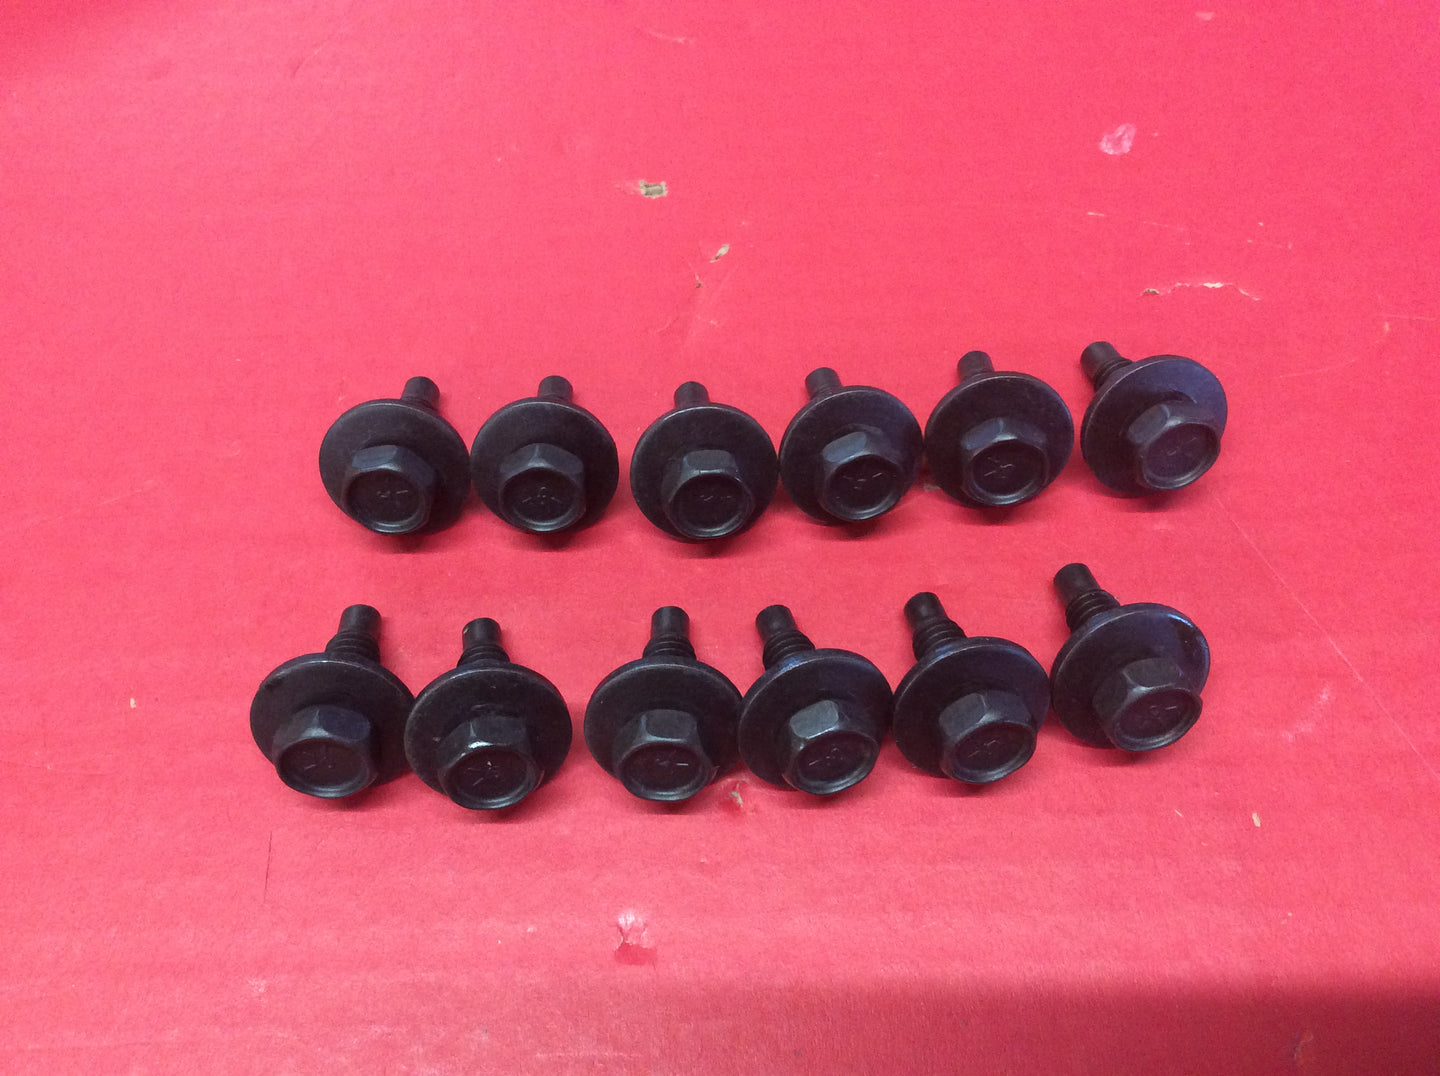 1965-1973 Mustang Front Fender Bolts with Flat Washers Set of 12 Enough for 2 Front Fenders